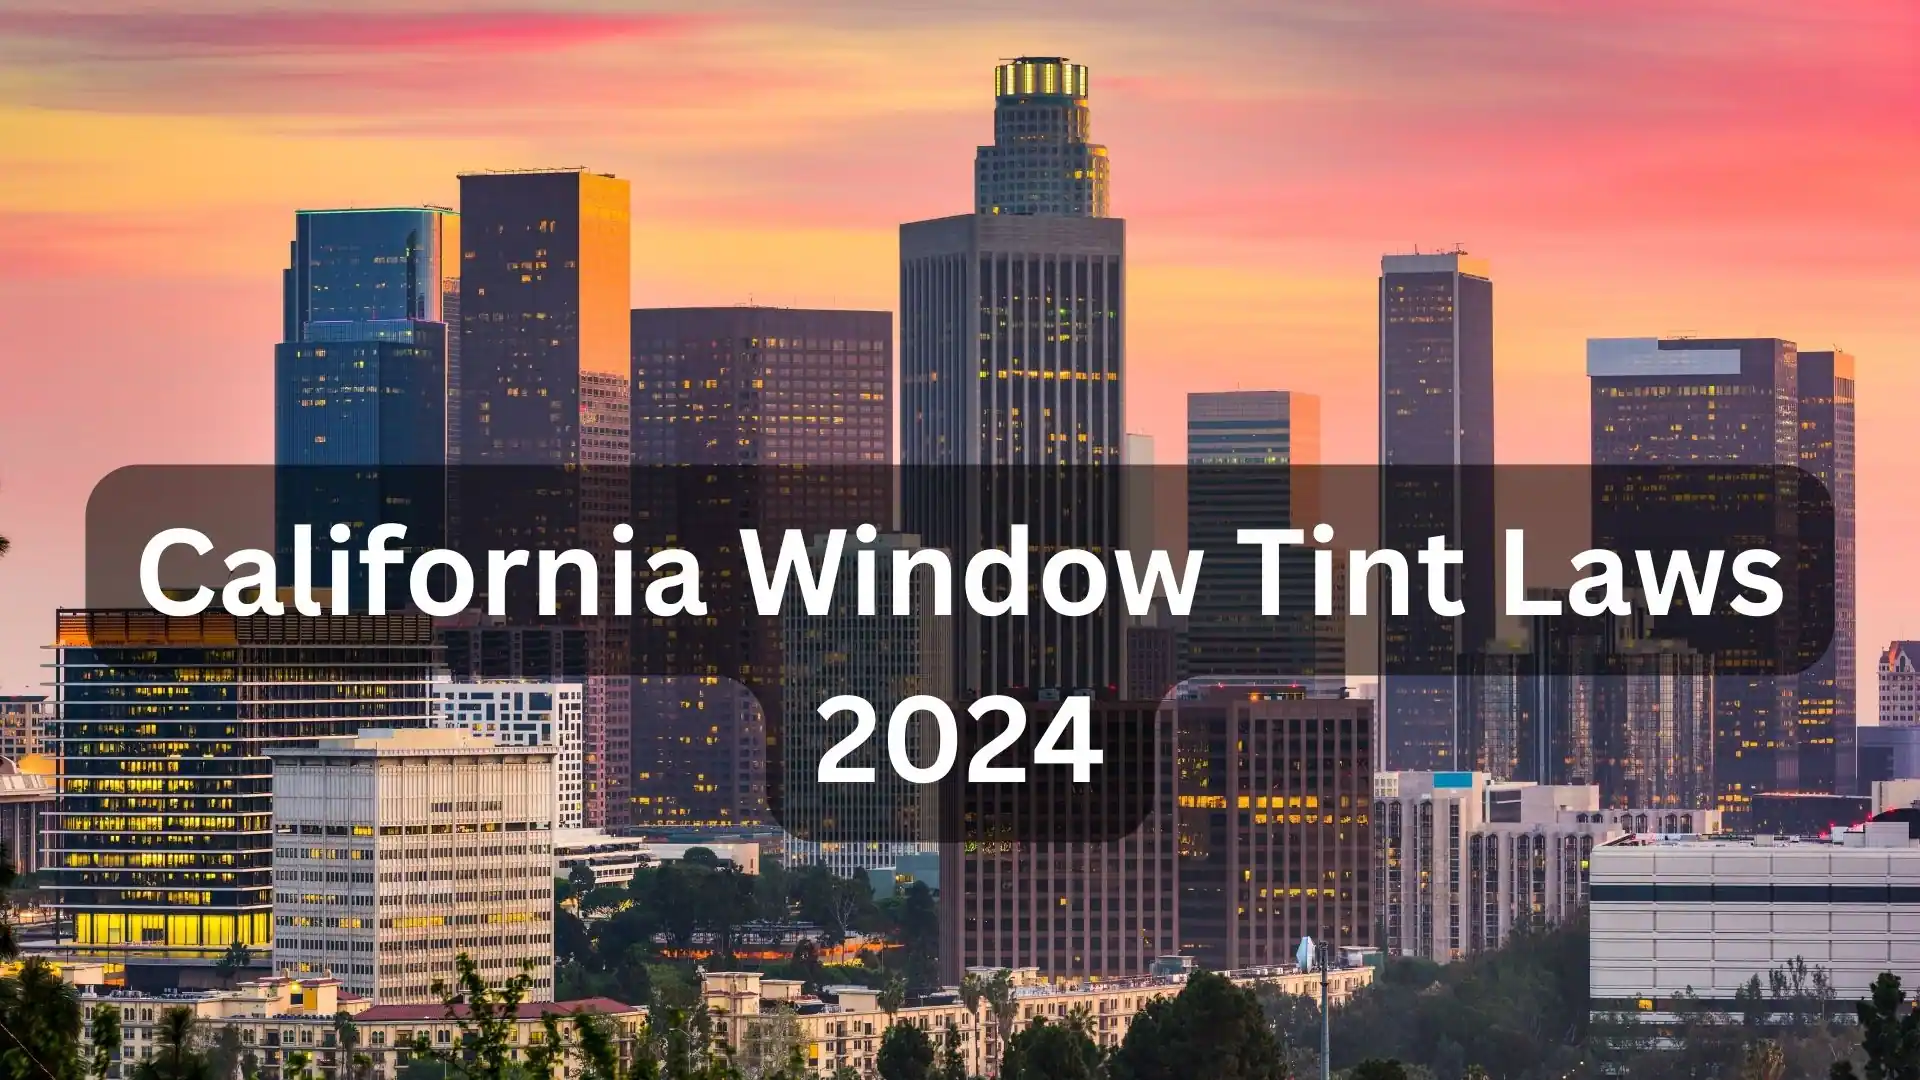 California Window Tint Laws 2024: See What’s Legal